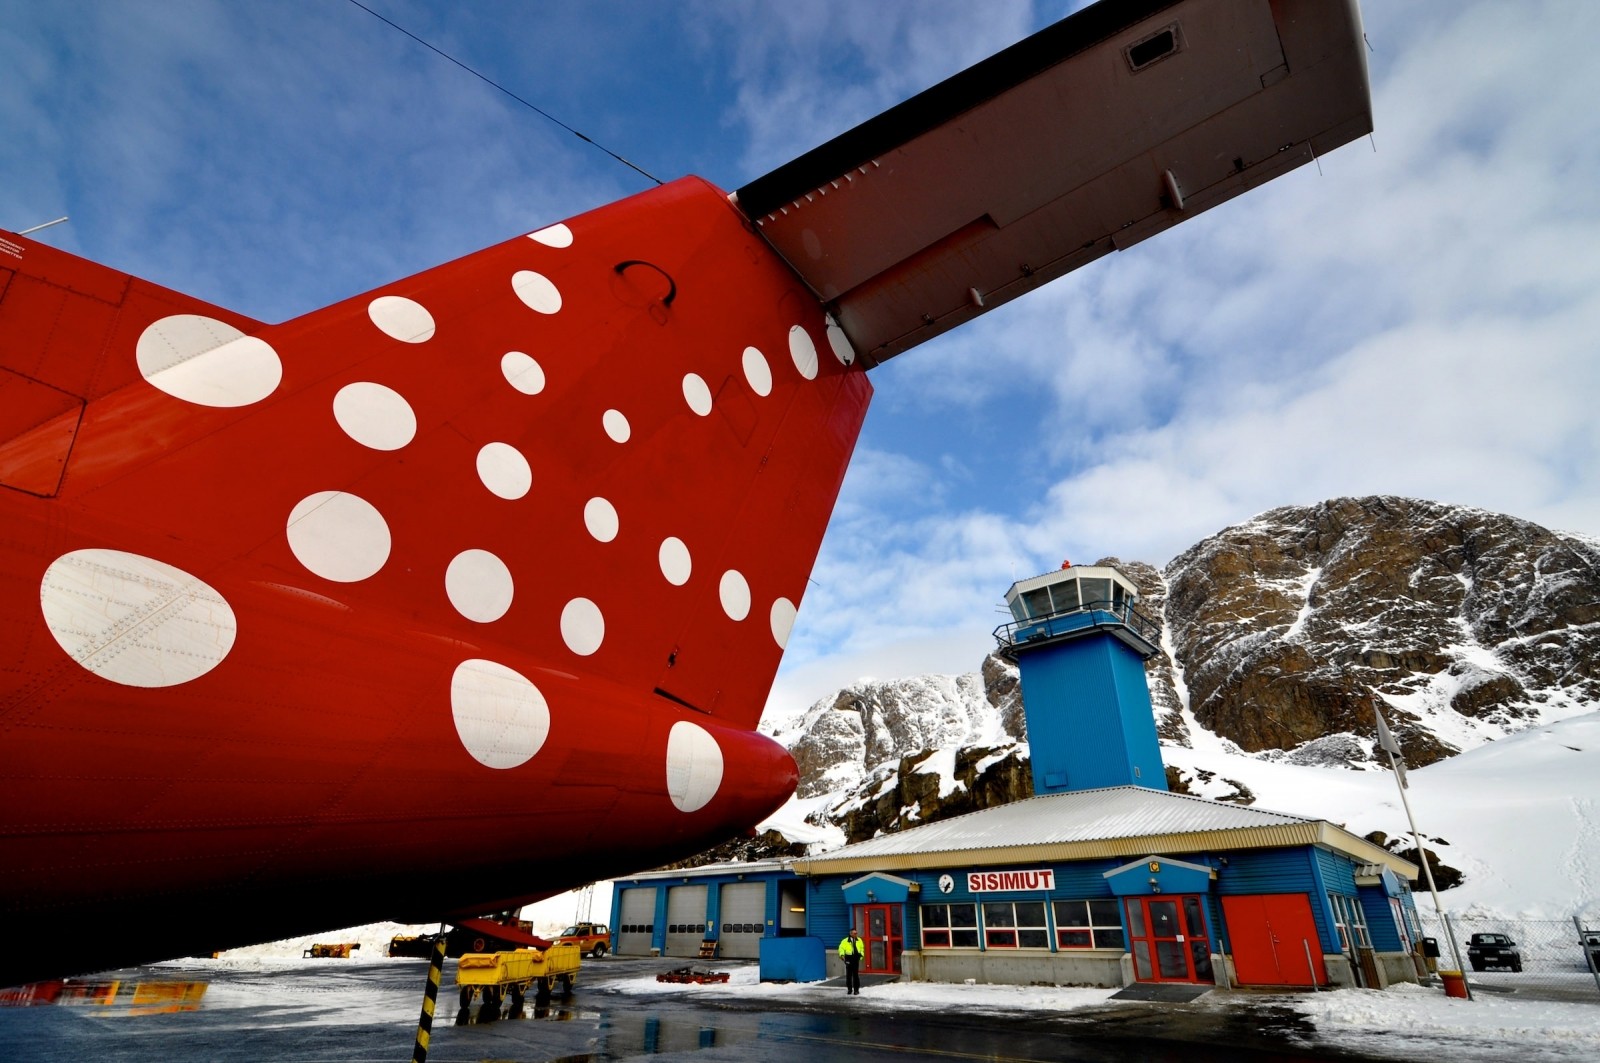 Spring weather at Sisimiut Airport in Greenland. Photo by Mads Pihl - Visit Greenland